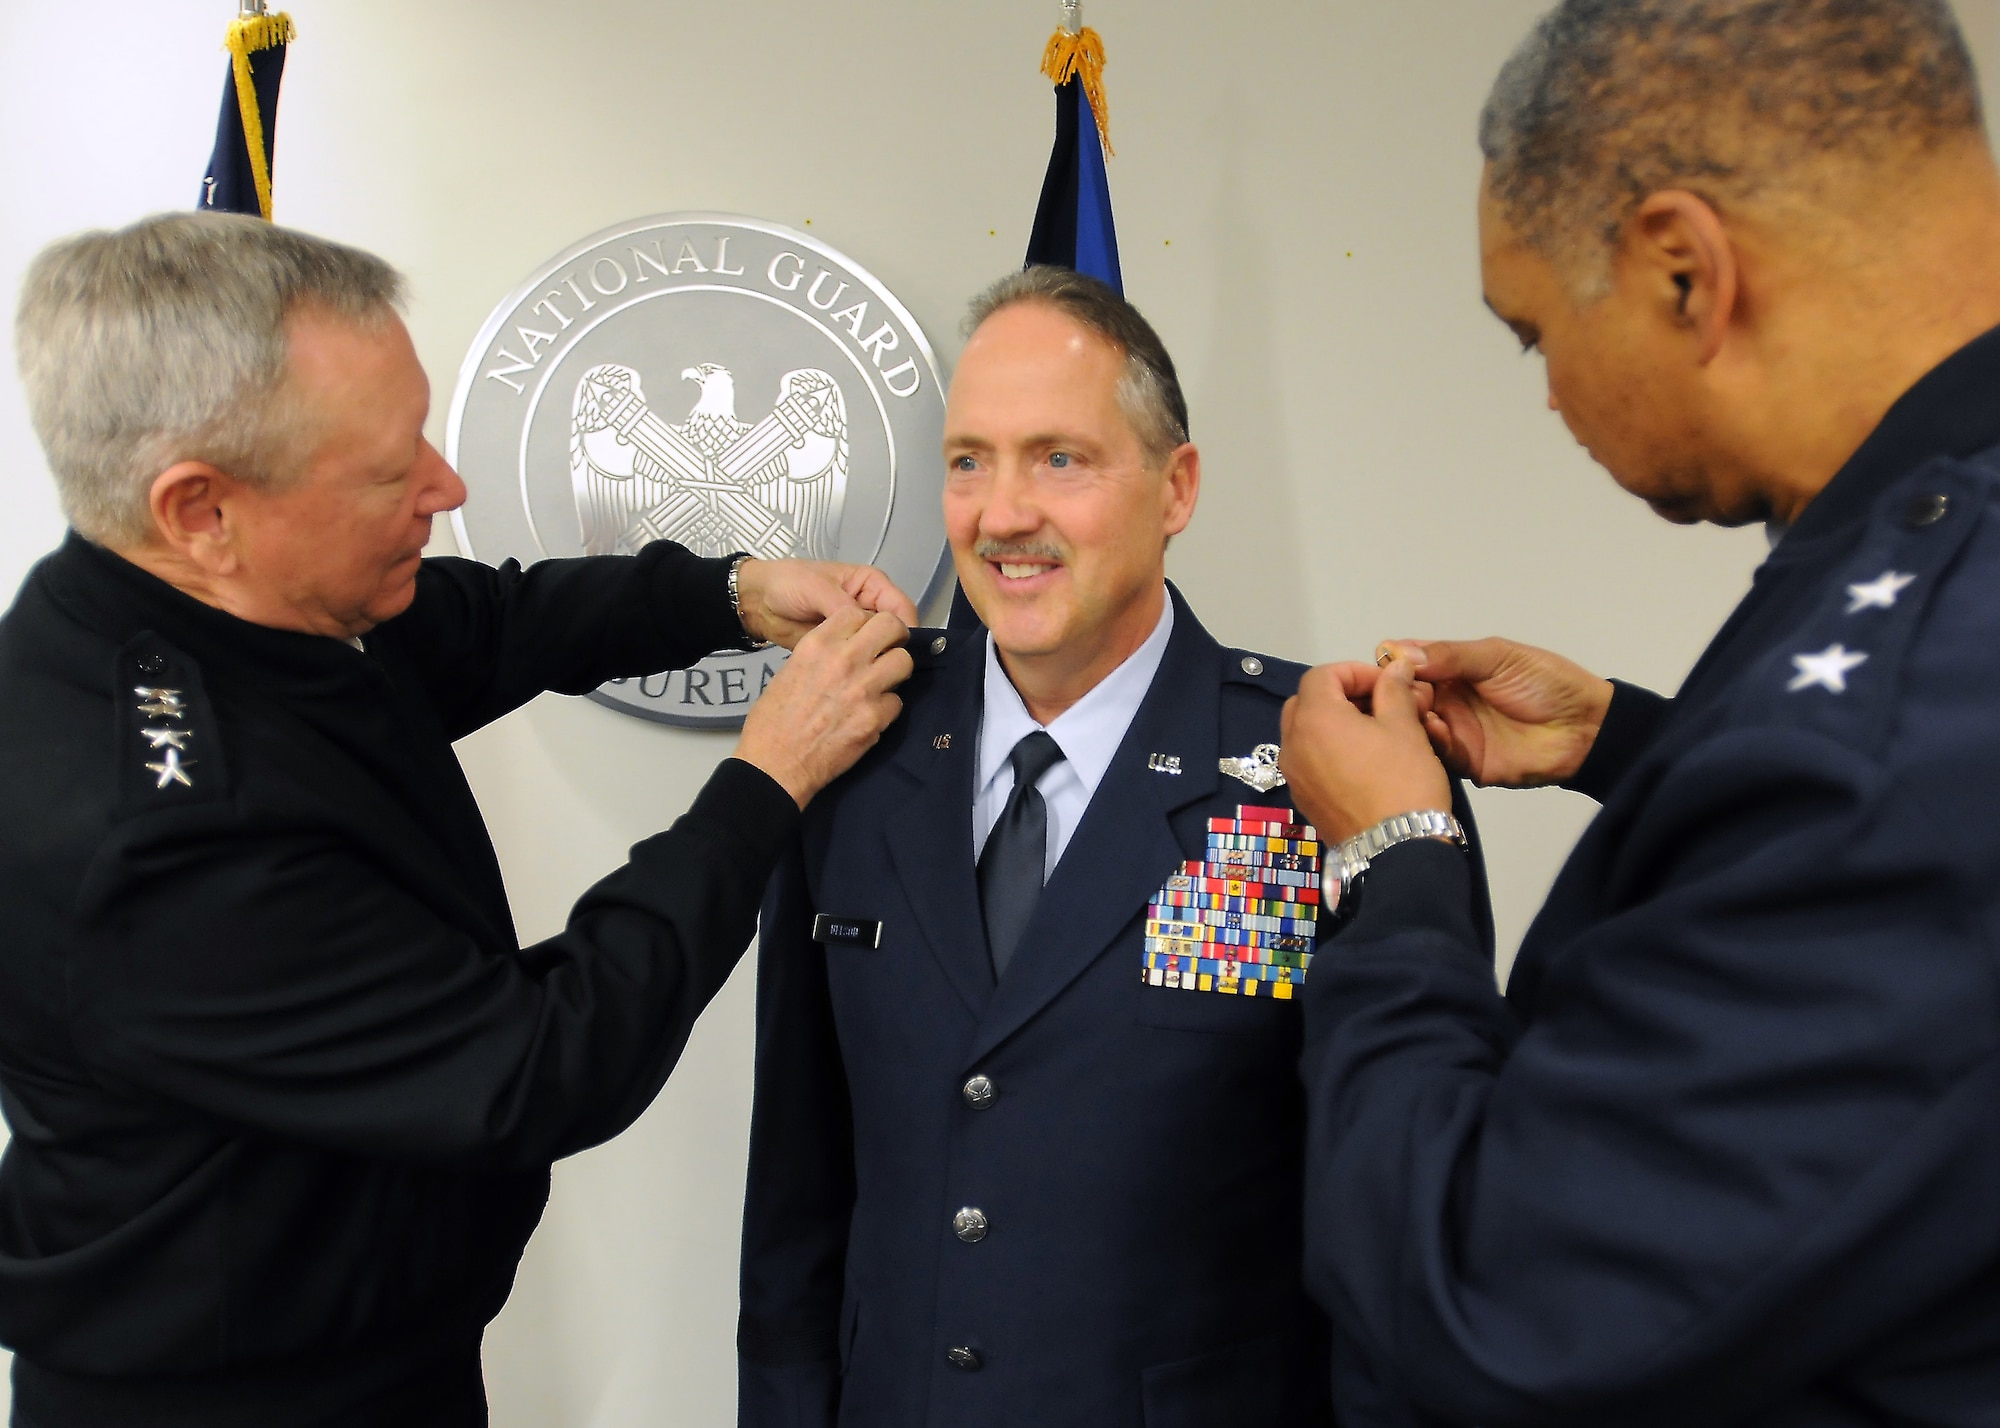 U.S. Army Gen. Frank Grass (left), chief of the National Guard Bureau, promotes Greg Nelson, vice director of Strategic Plans, Policy and International Affairs at the National Guard Bureau, to the rank of brigadier general during a ceremony at the National Guard Readiness Center in Arlington, Va., Nov. 19, 2014. Nelson served as commander of the Kentucky Air National Guard’s 123rd Airlift Wing in Louisville from 2008 to 2012. (U.S. Army National Guard photo by Staff Sgt. Michelle Gonzalez)